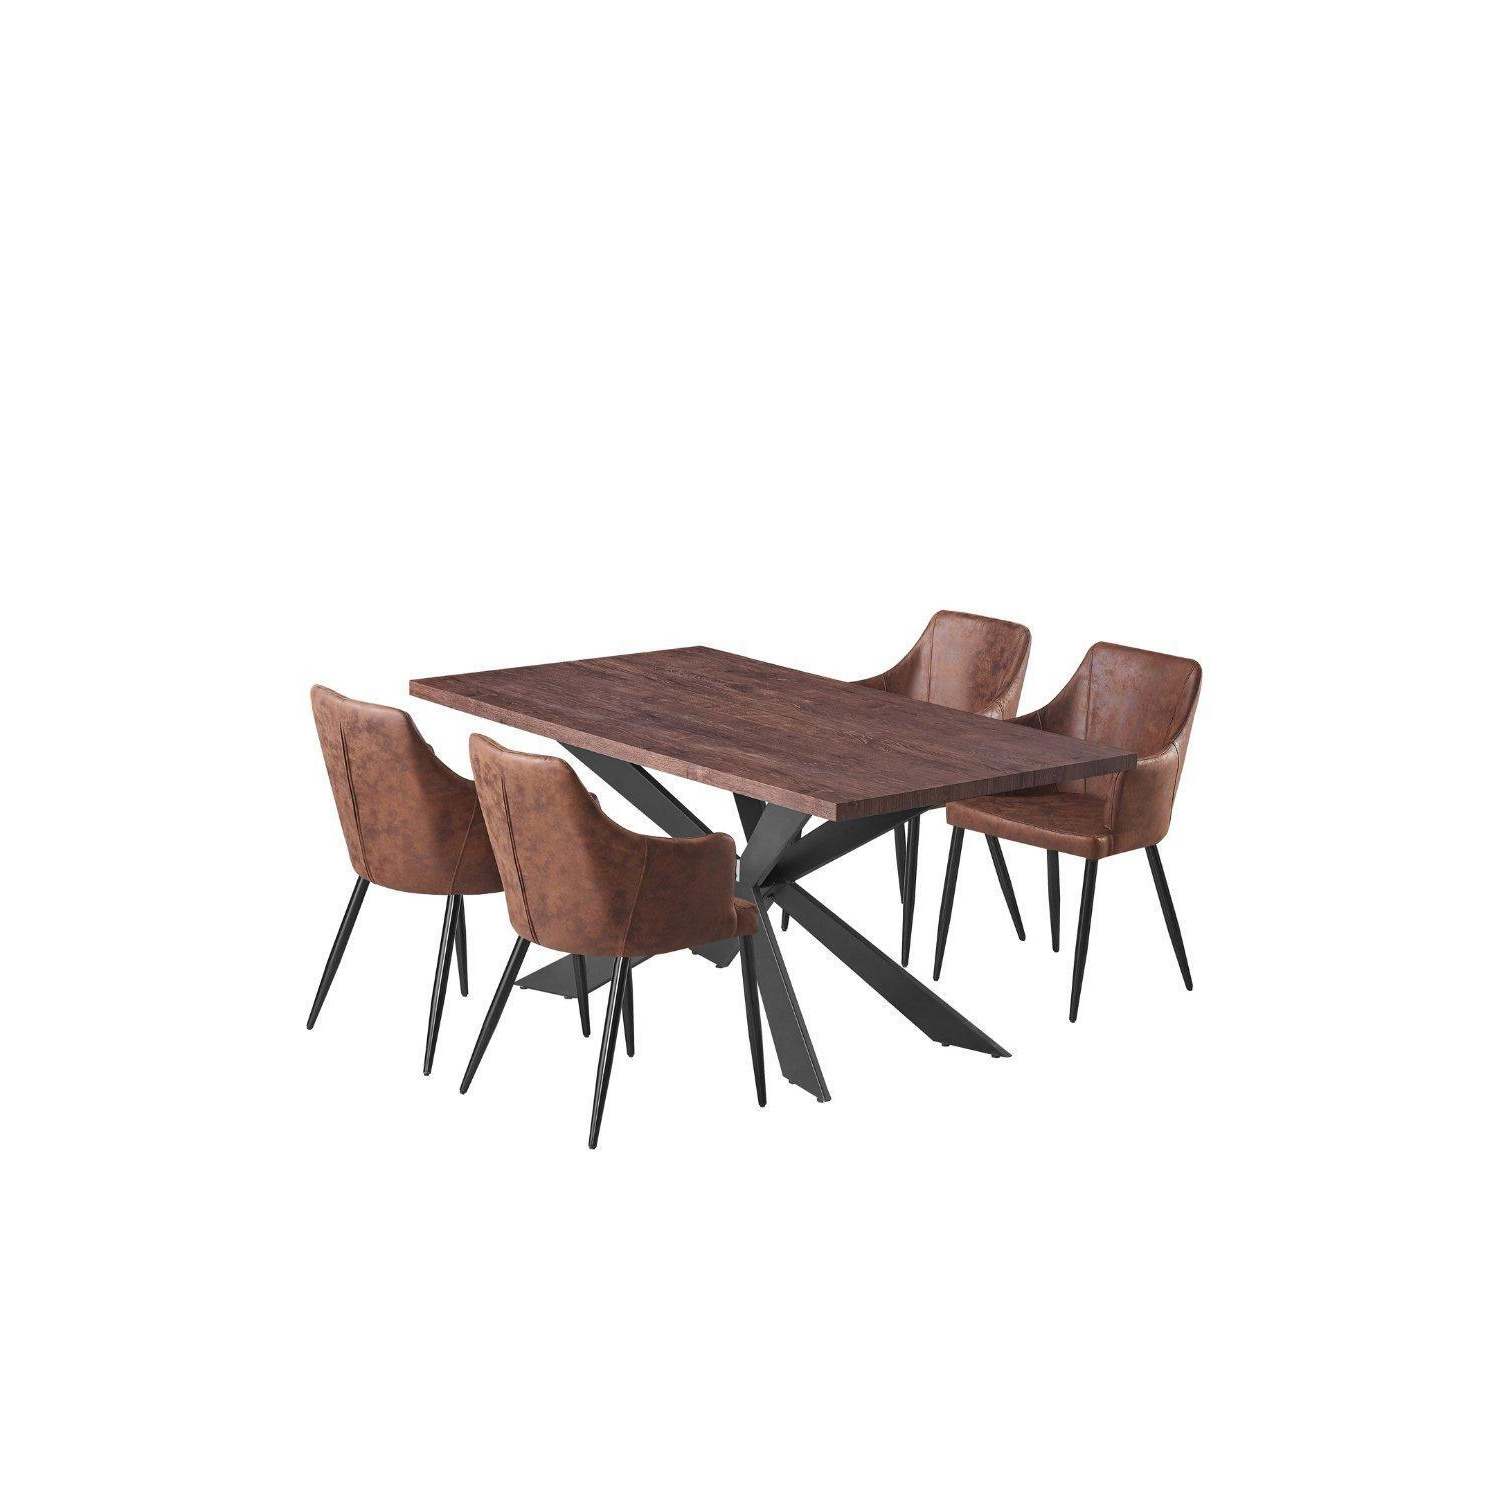 'Zarah Duke' Dining Set with a Table and 4 Chairs - image 1